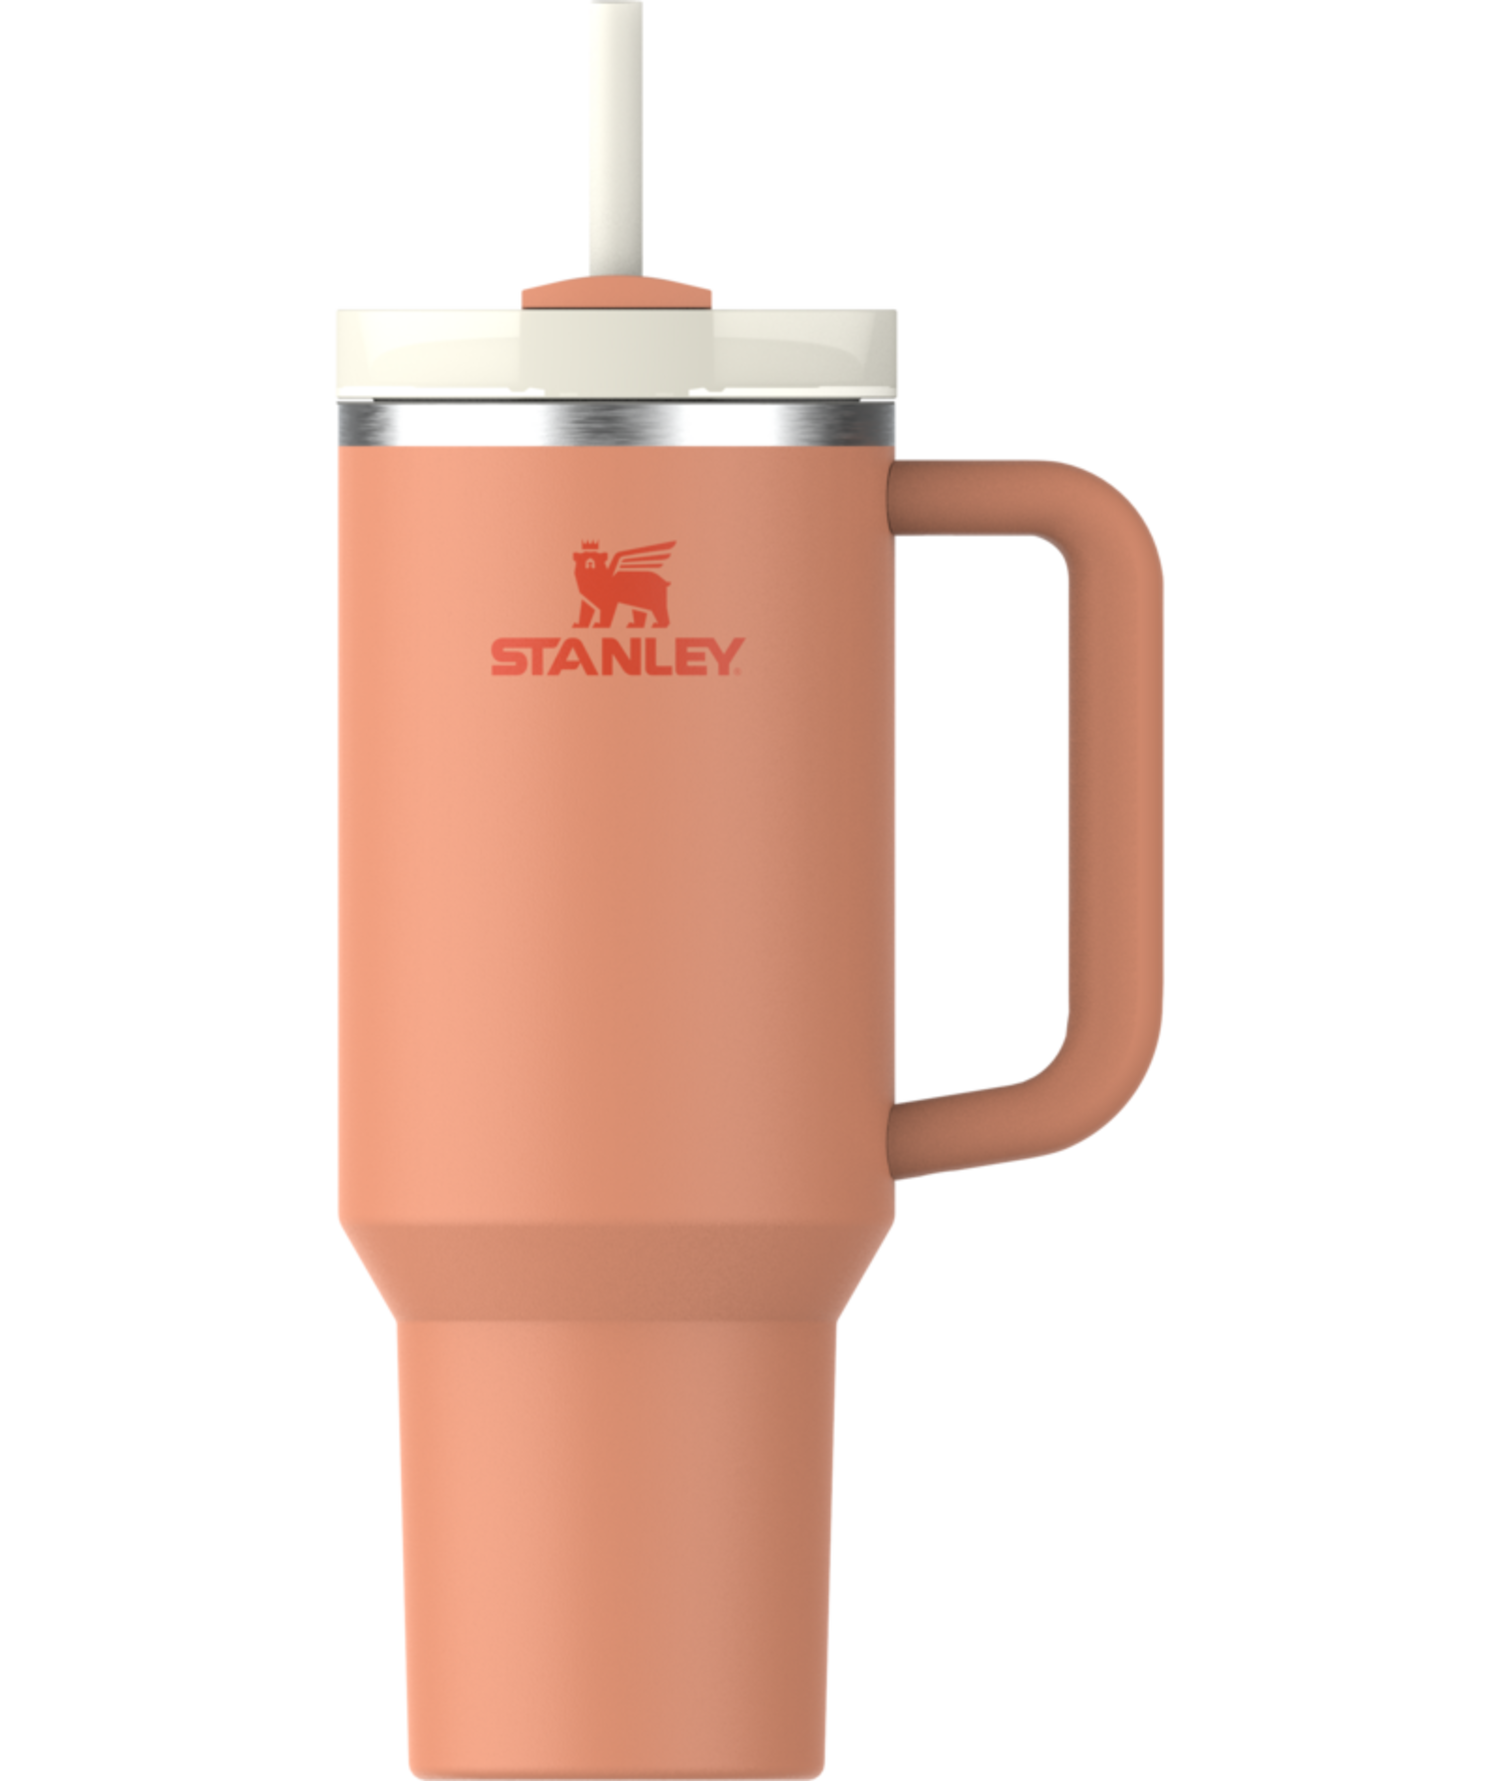 Whole Earth Provision Co.  STANLEY Stanley The Quencher H2.0